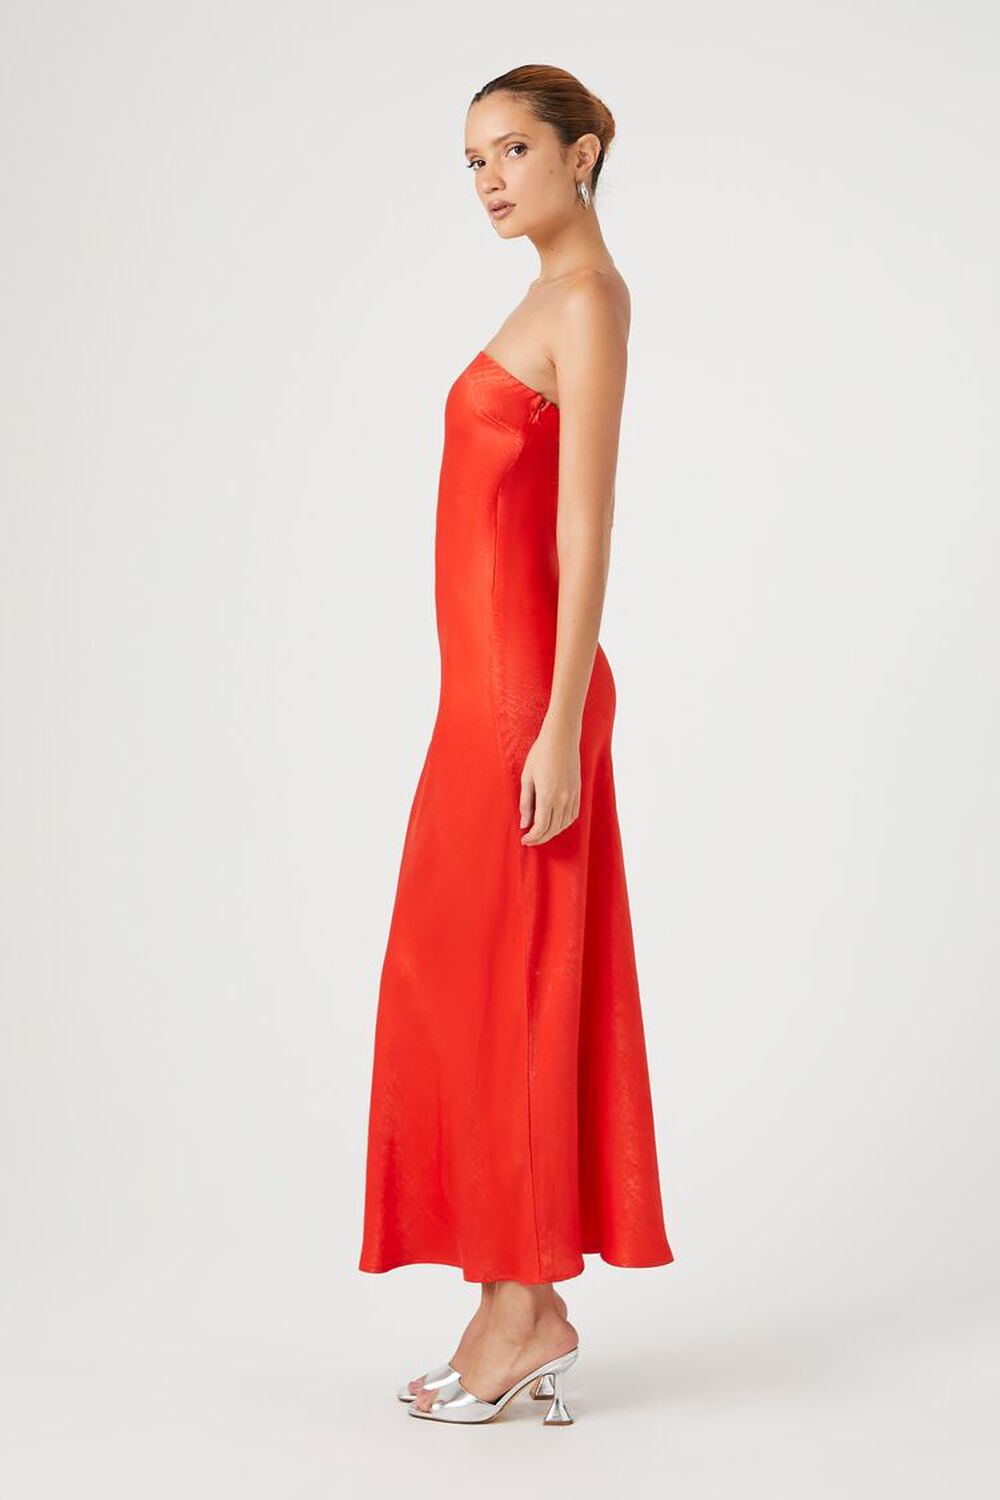 FIERY RED Satin Strapless Maxi Dress, image 2